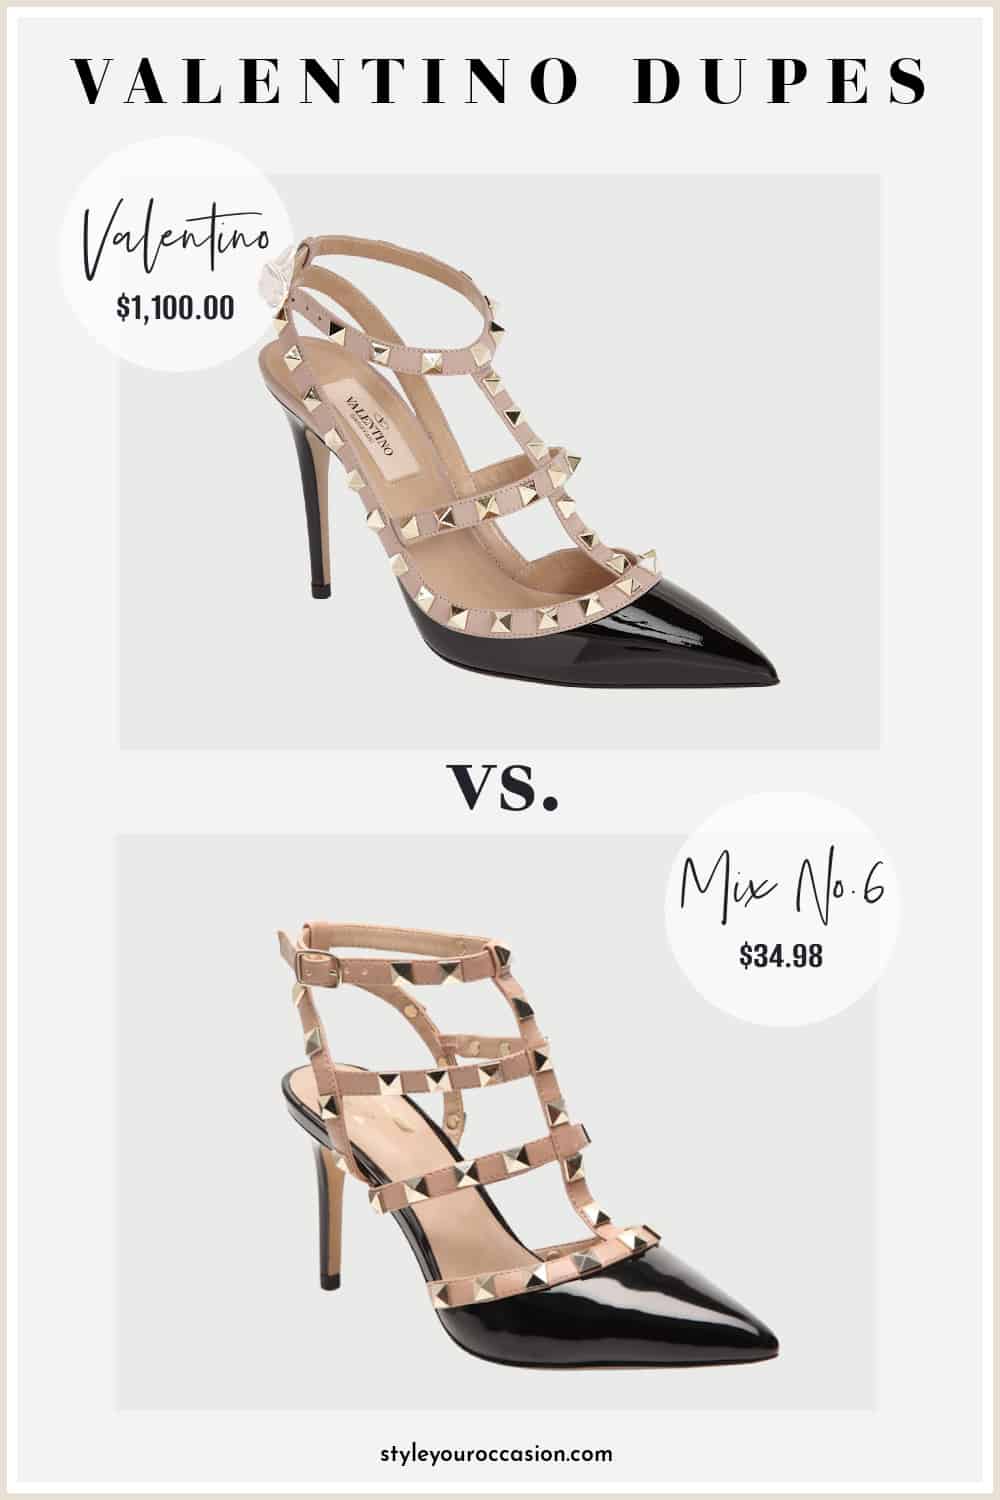 image of a Valentino heel and a look-alike heel with stud details